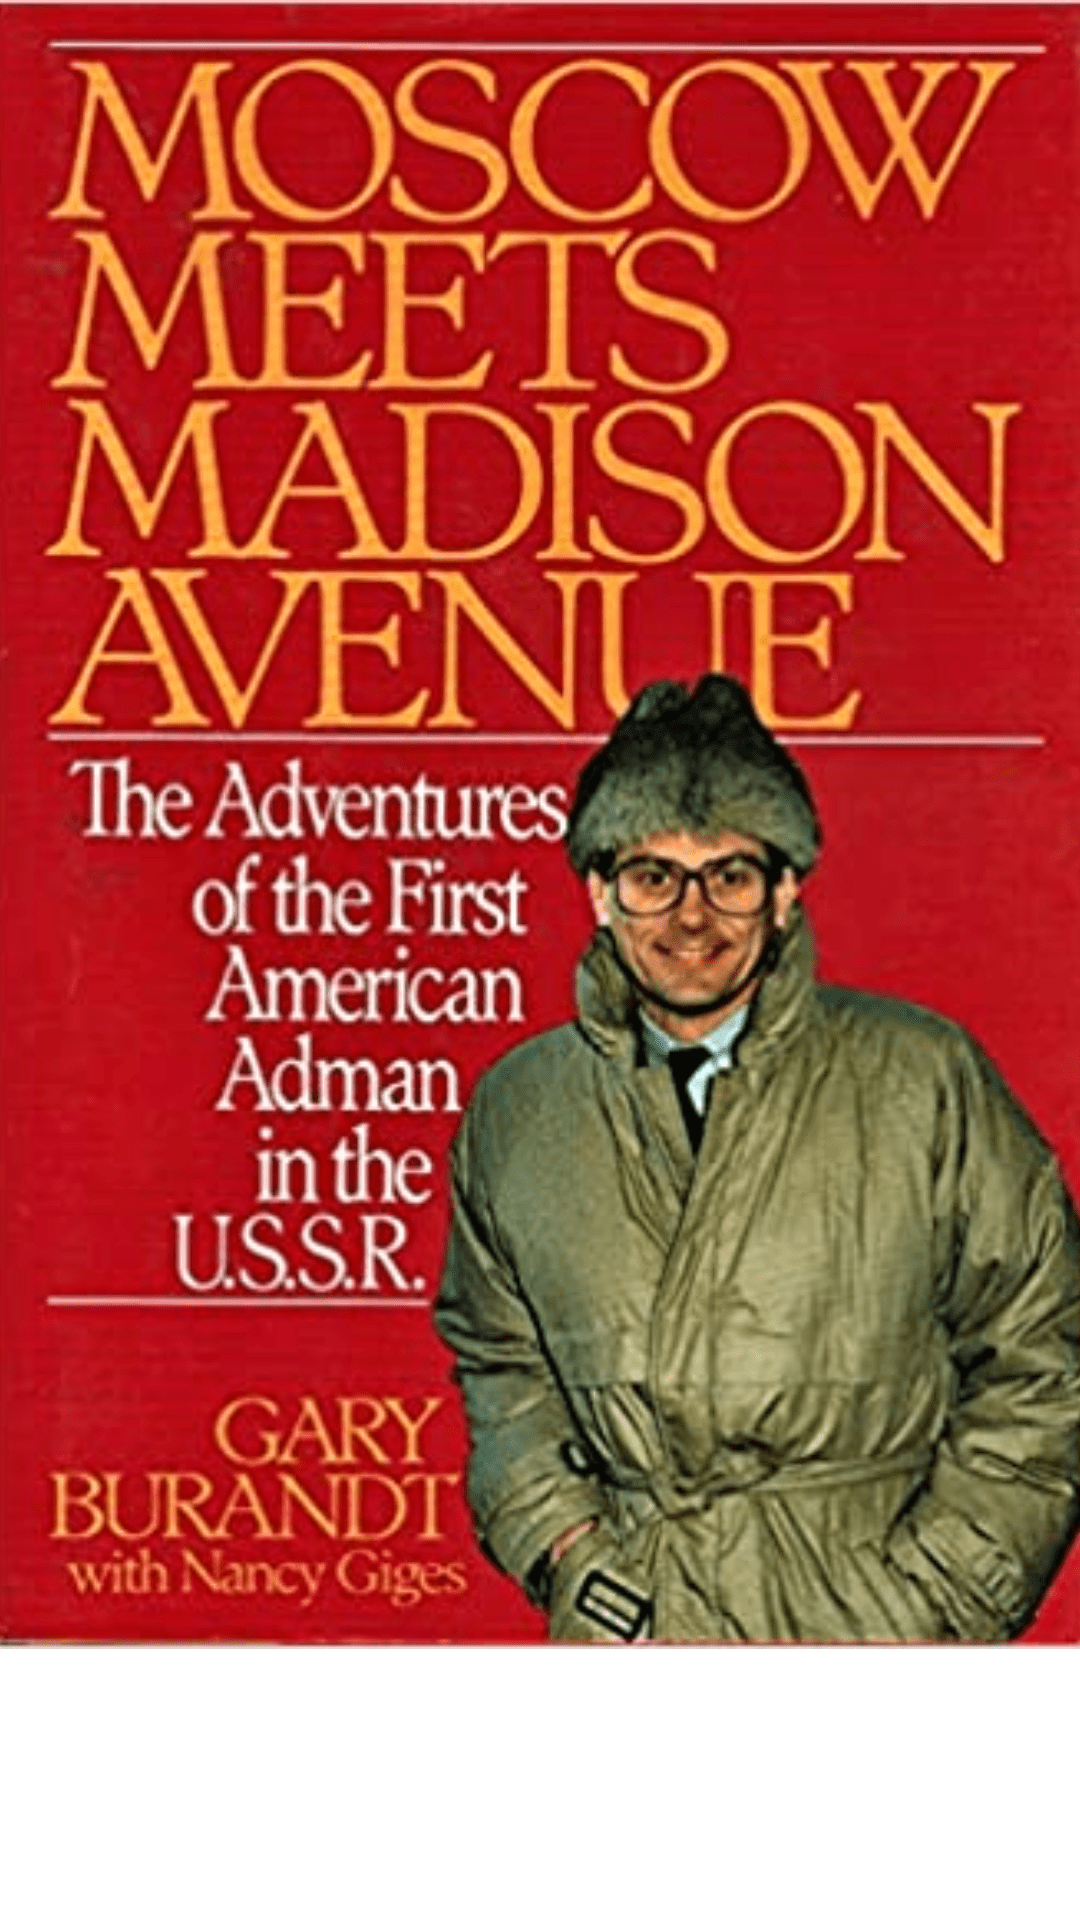 Moscow Meets Madison Avenue : The Adventures of the First American Adman in the U.S.S.R